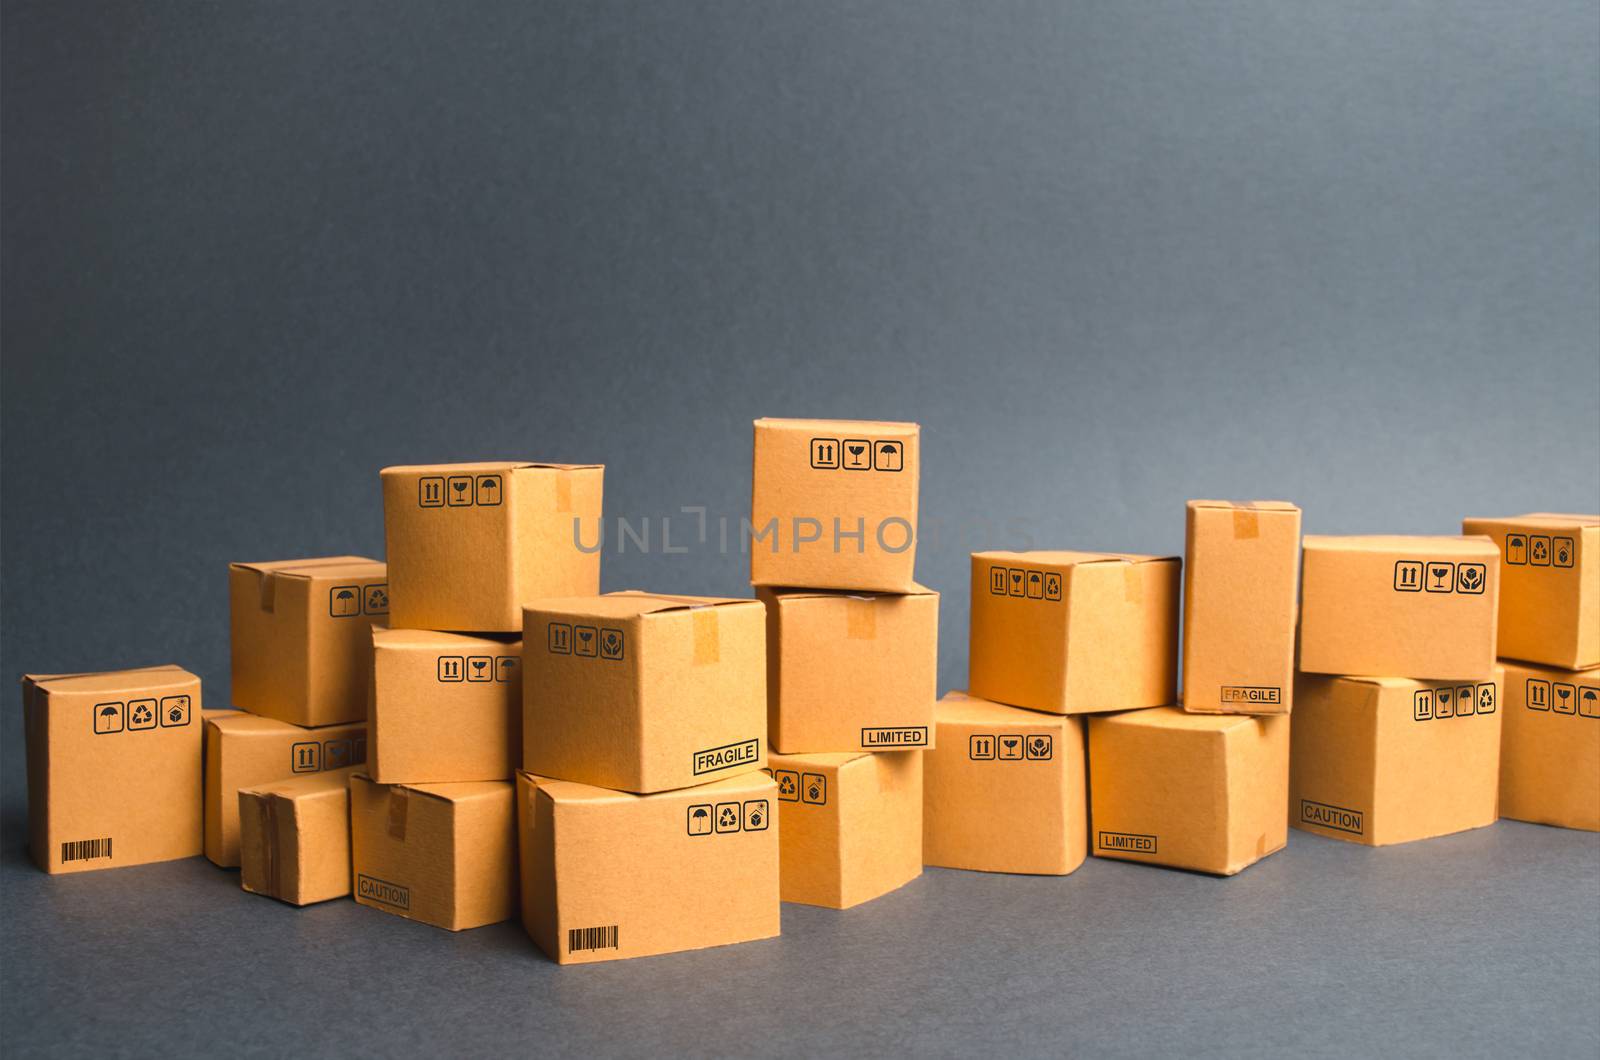 Many cardboard boxes. products, goods, Warehouse, stock. commerce and retail. E-commerce, sale of goods through online trading platform. Freight shipping, deliver. sales of goods and services.